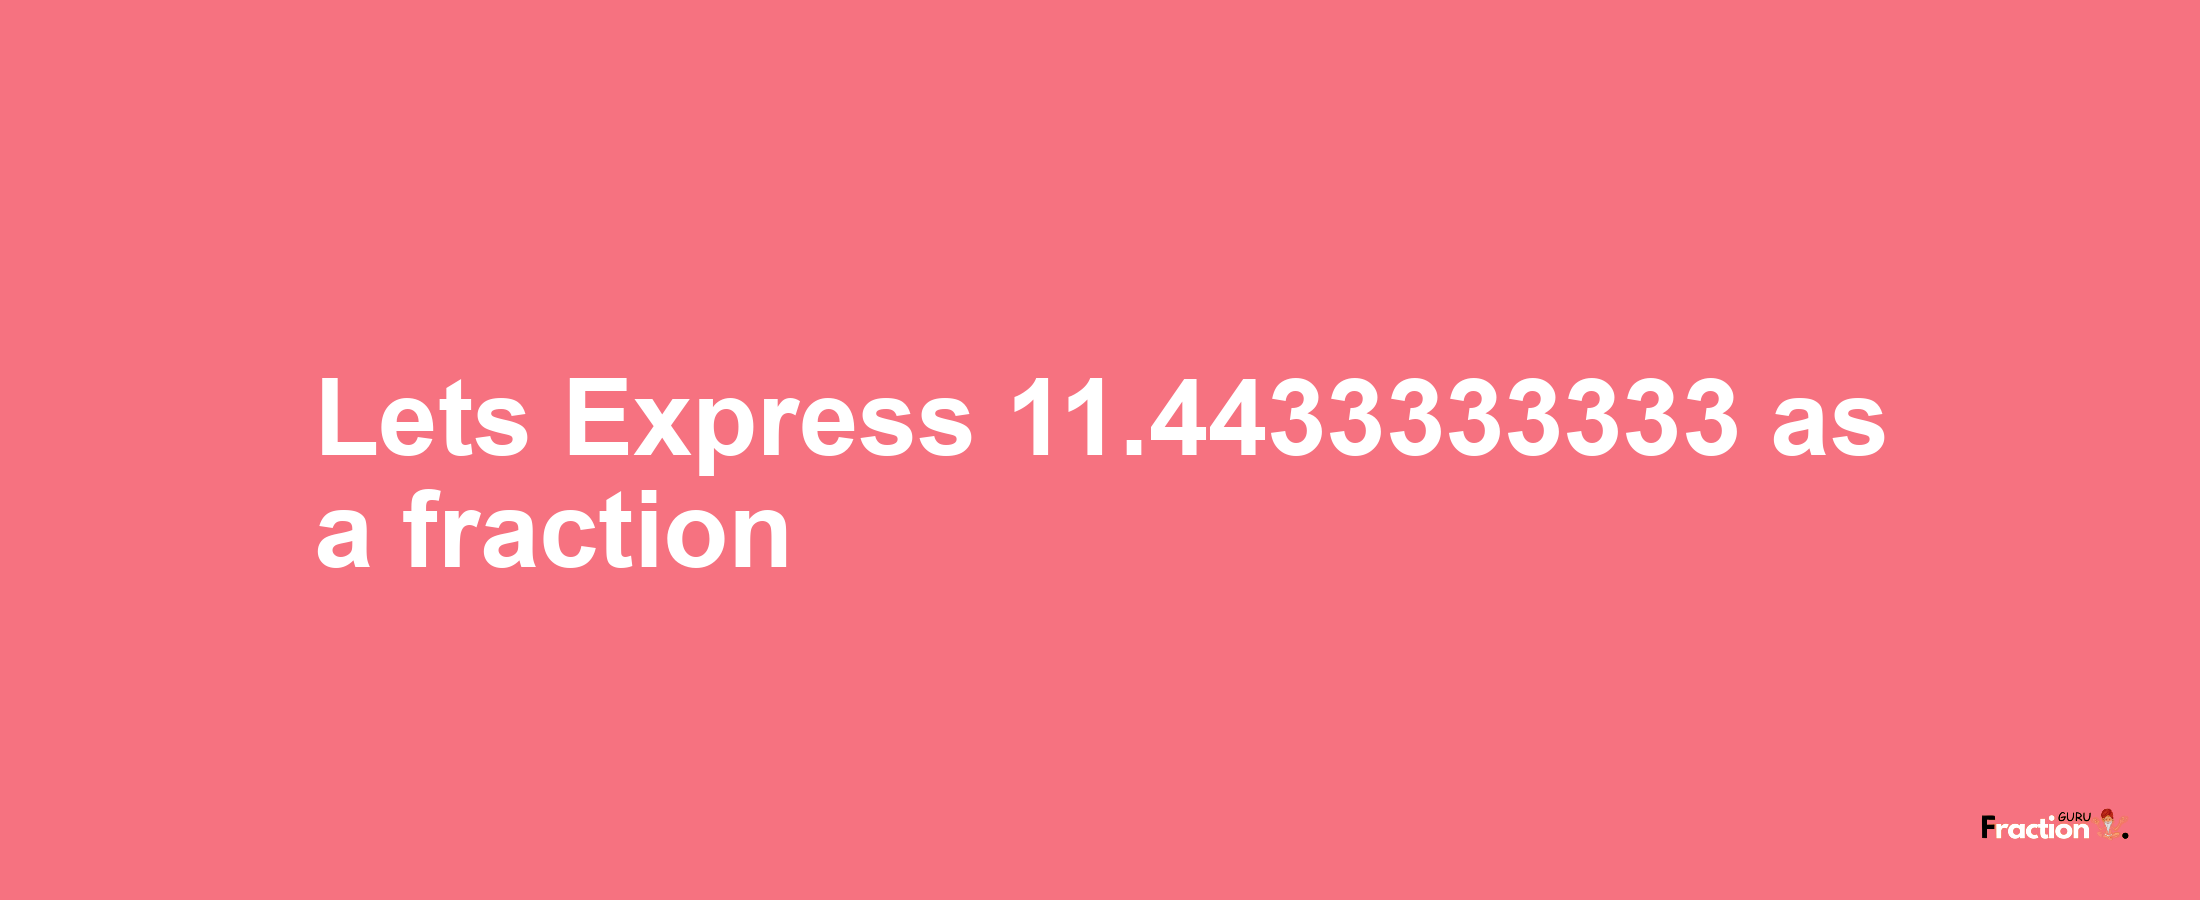 Lets Express 11.4433333333 as afraction